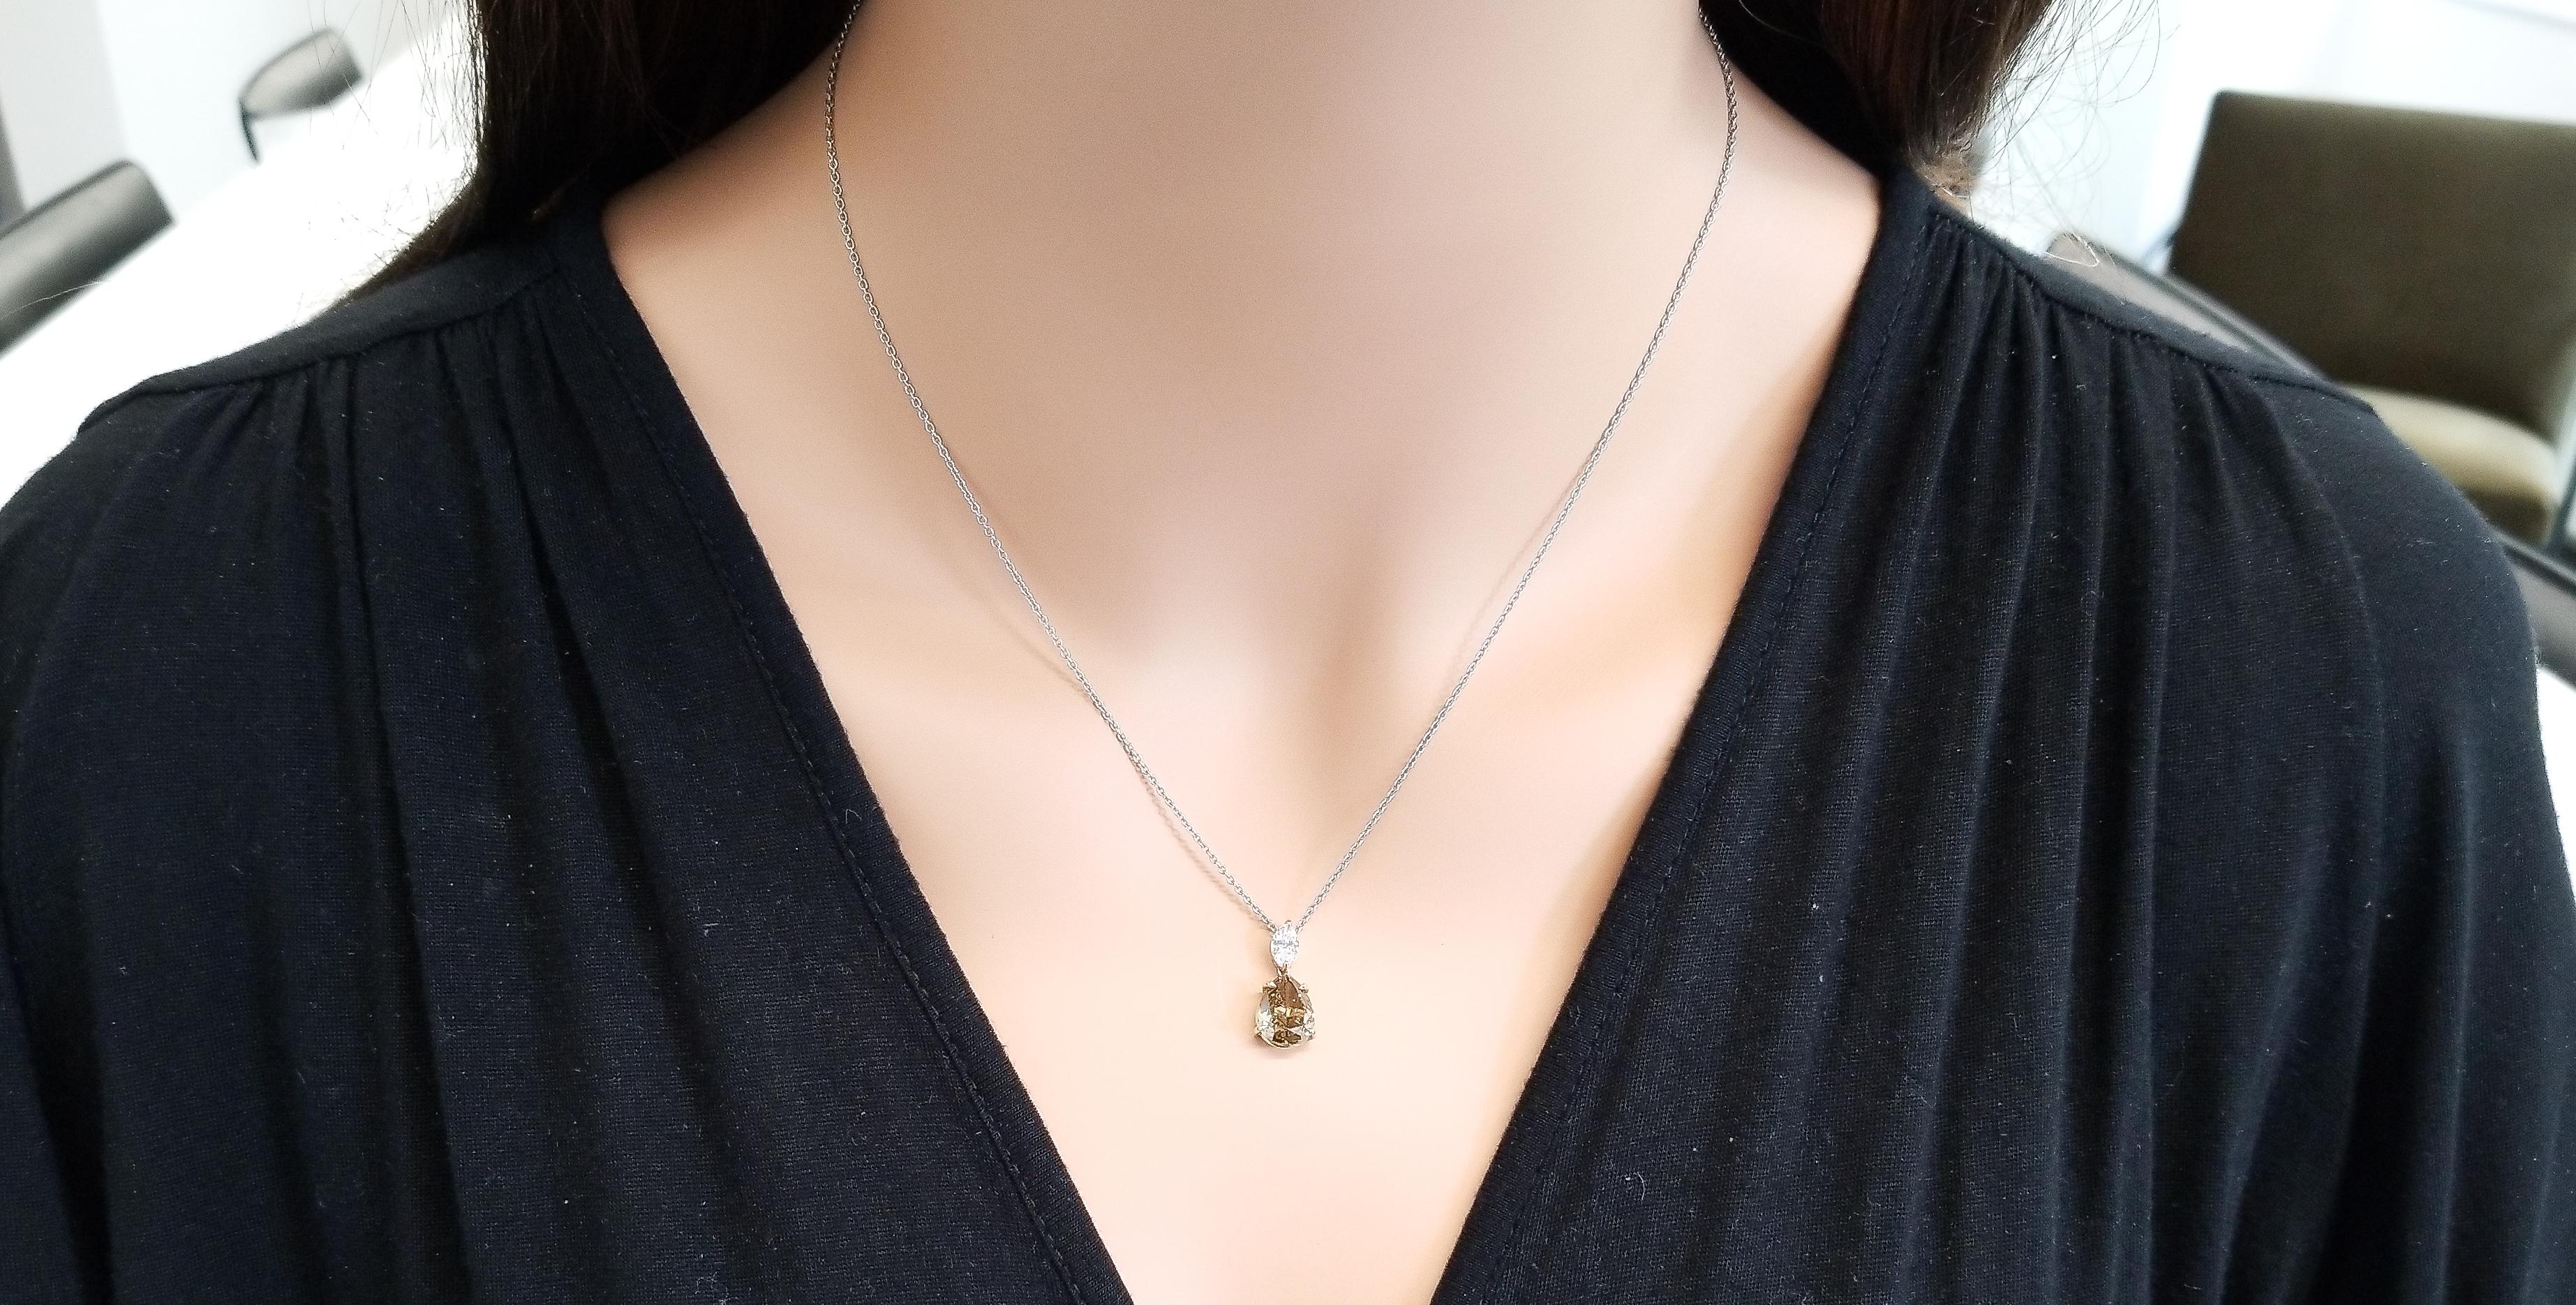 This necklace features one GIA certified pear shaped natural fancy dark brown-greenish-yellow diamond with a weight of 2.44 carats and SI2 clarity. The intense color of this diamond is complemented by a GIA certified marquise shaped natural light